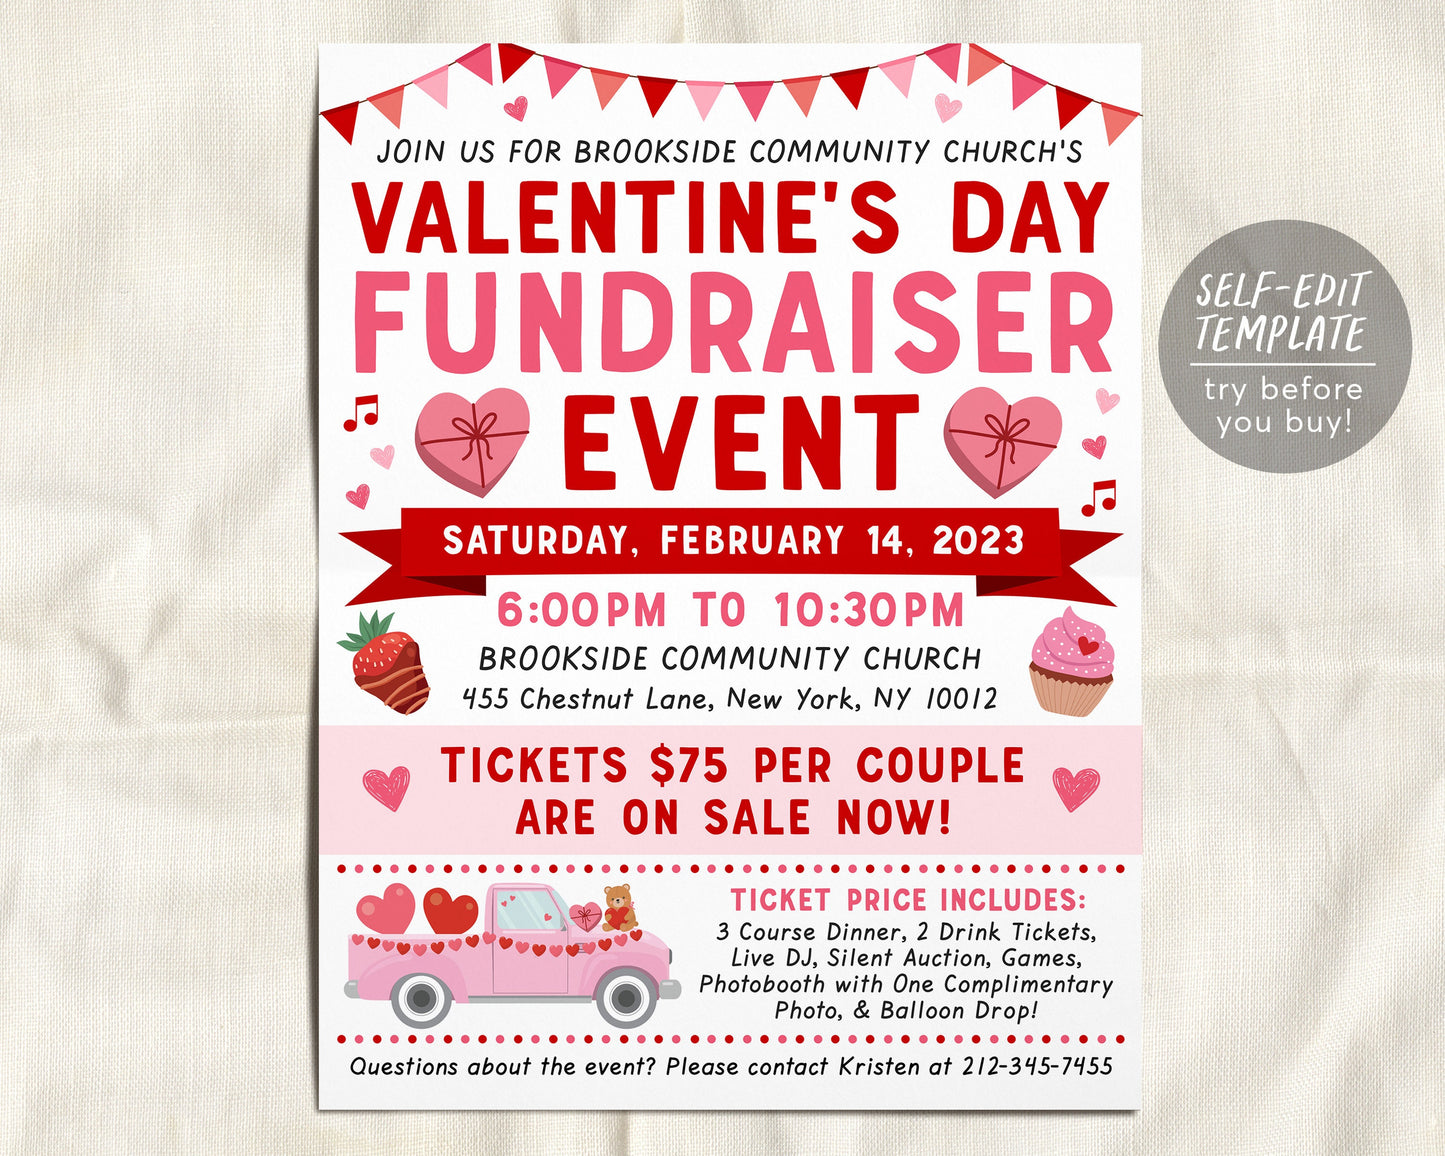 Adult Valentine's Day Fundraiser Event Flyer Editable Template, Valentines Sweetheart Dance Ticket Invitation, Community Church Party Invite